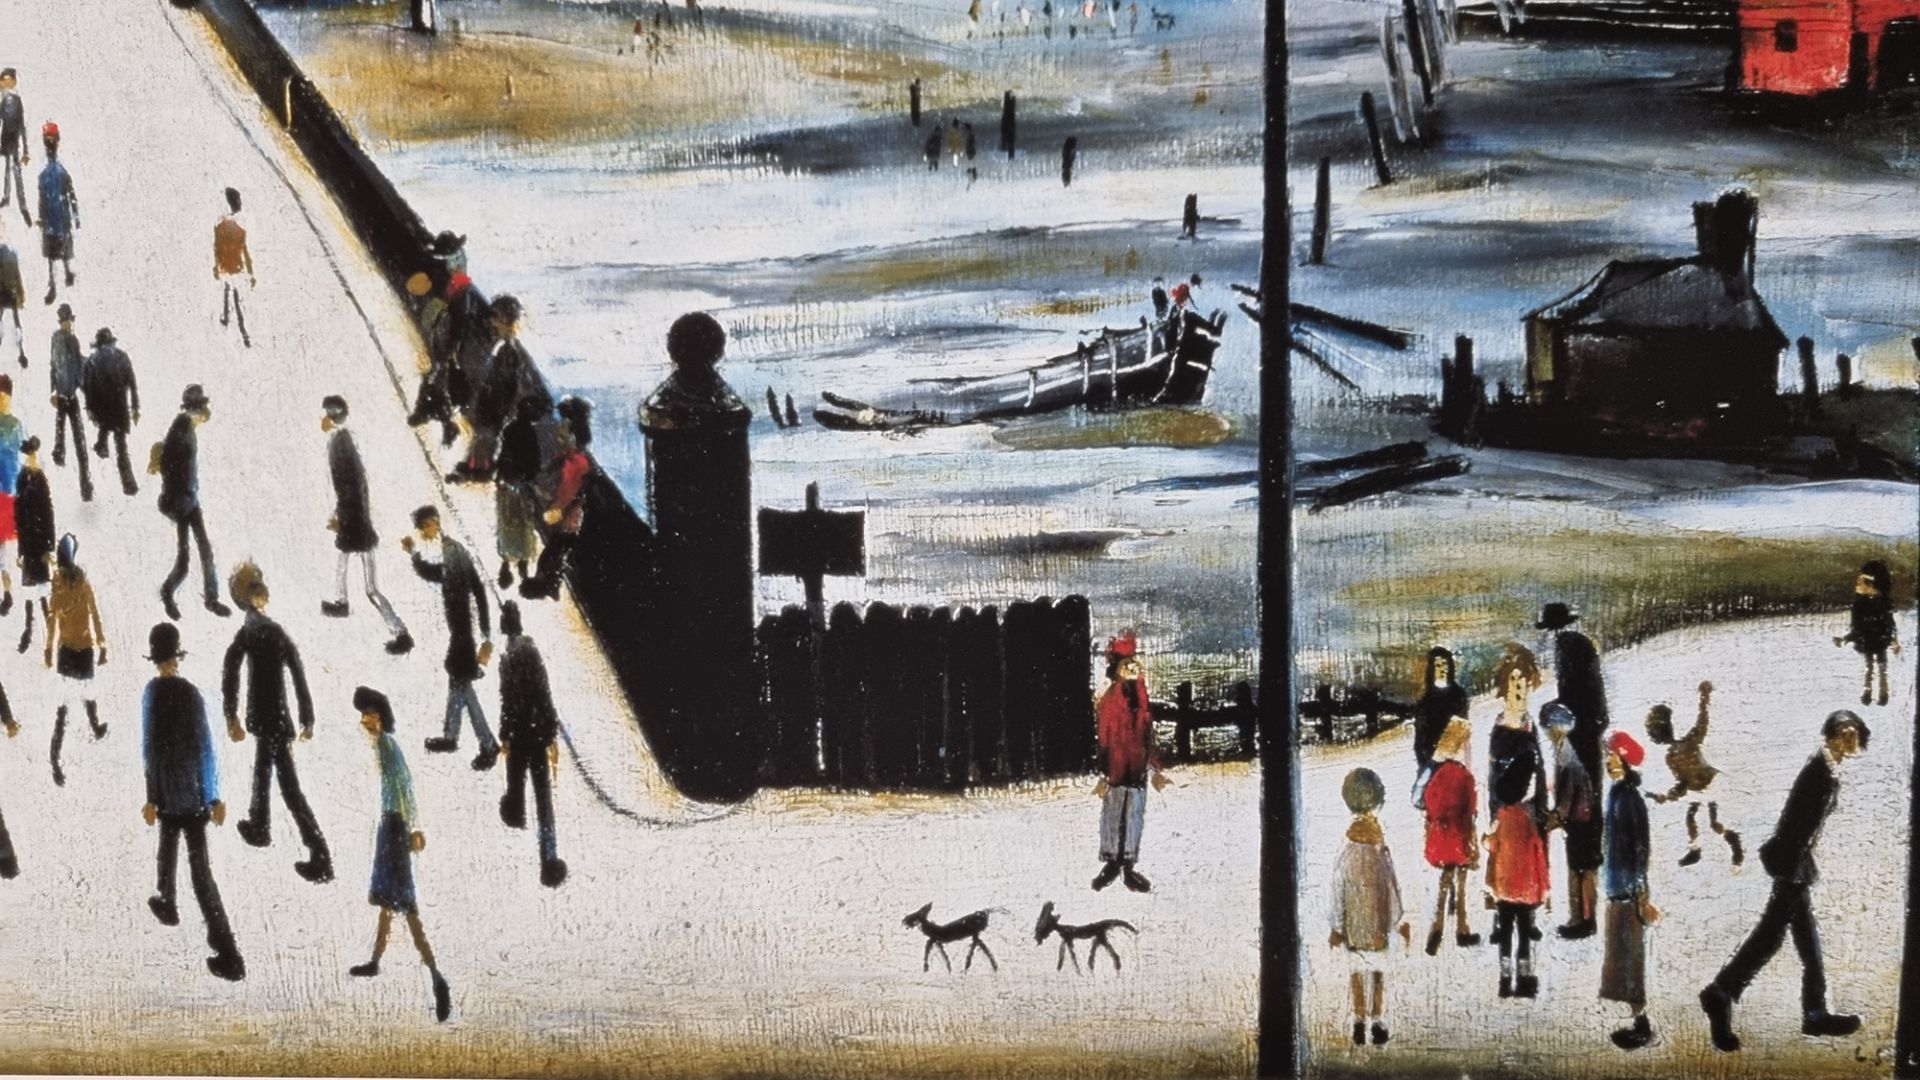 Limited Edition by L.S. Lowry titled "The Canal Bridge, 1949". - Image 5 of 7